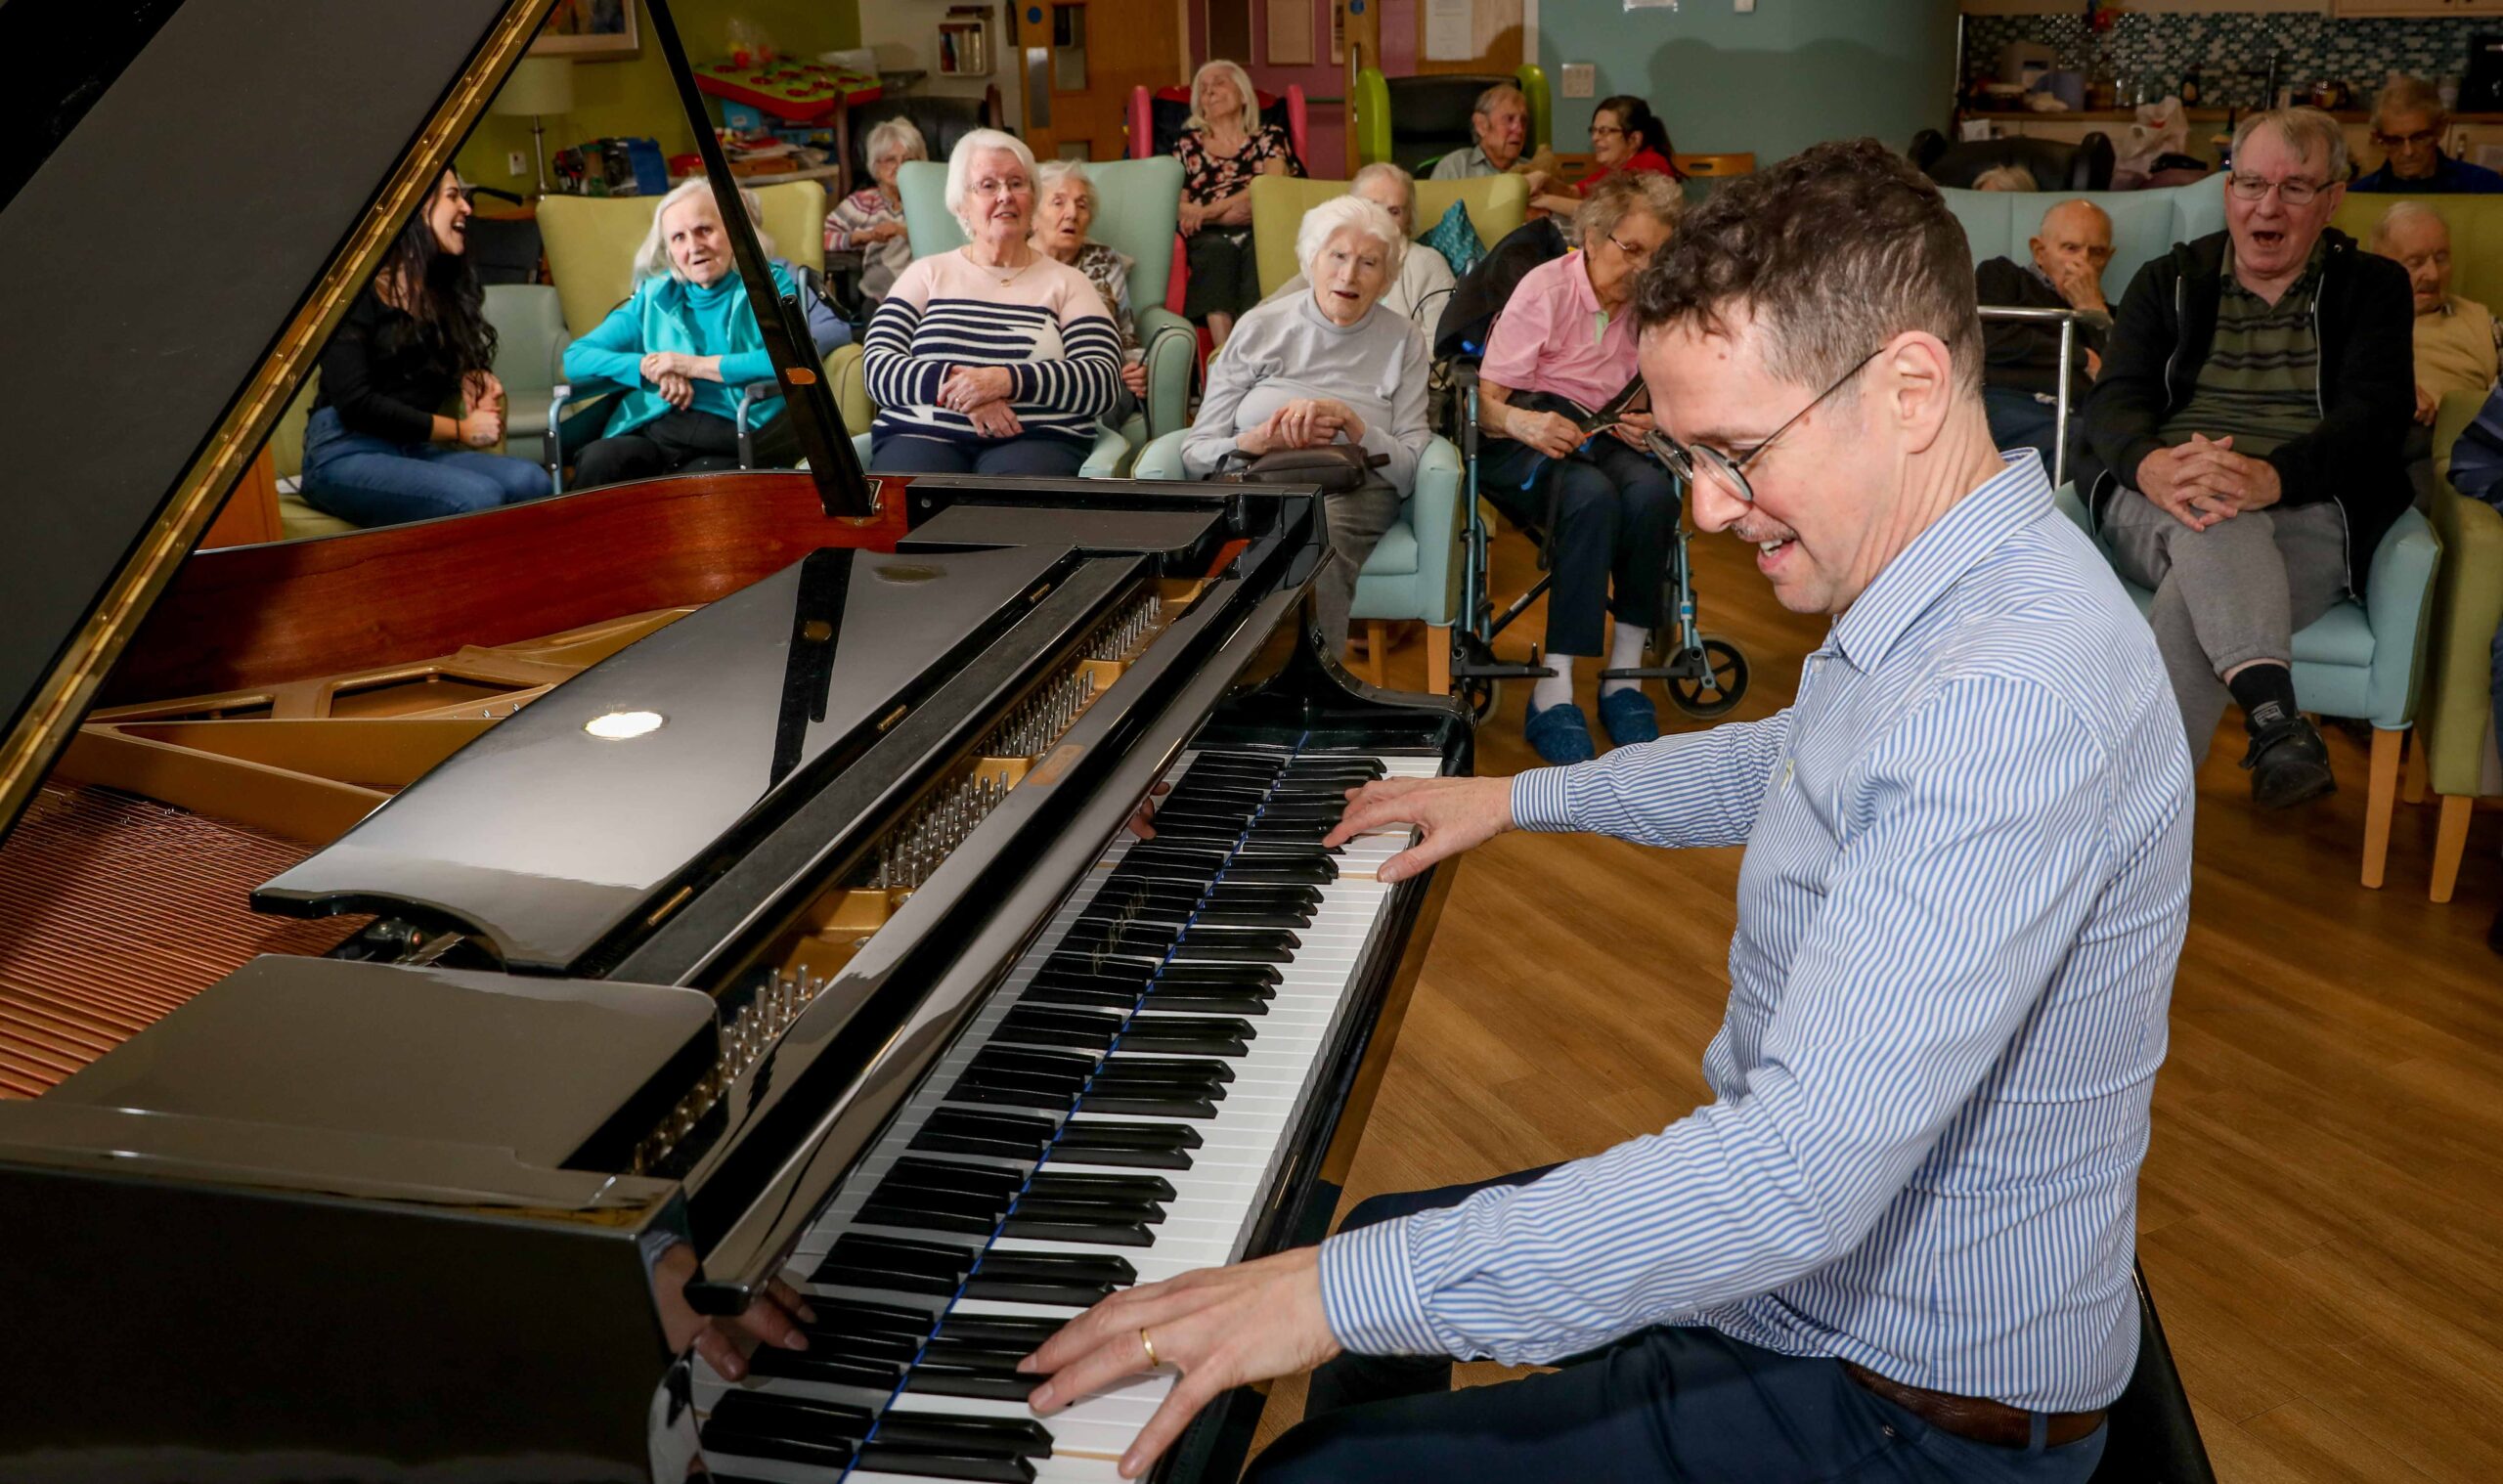 Acclaimed pianist creates musical magic at North Wales care home